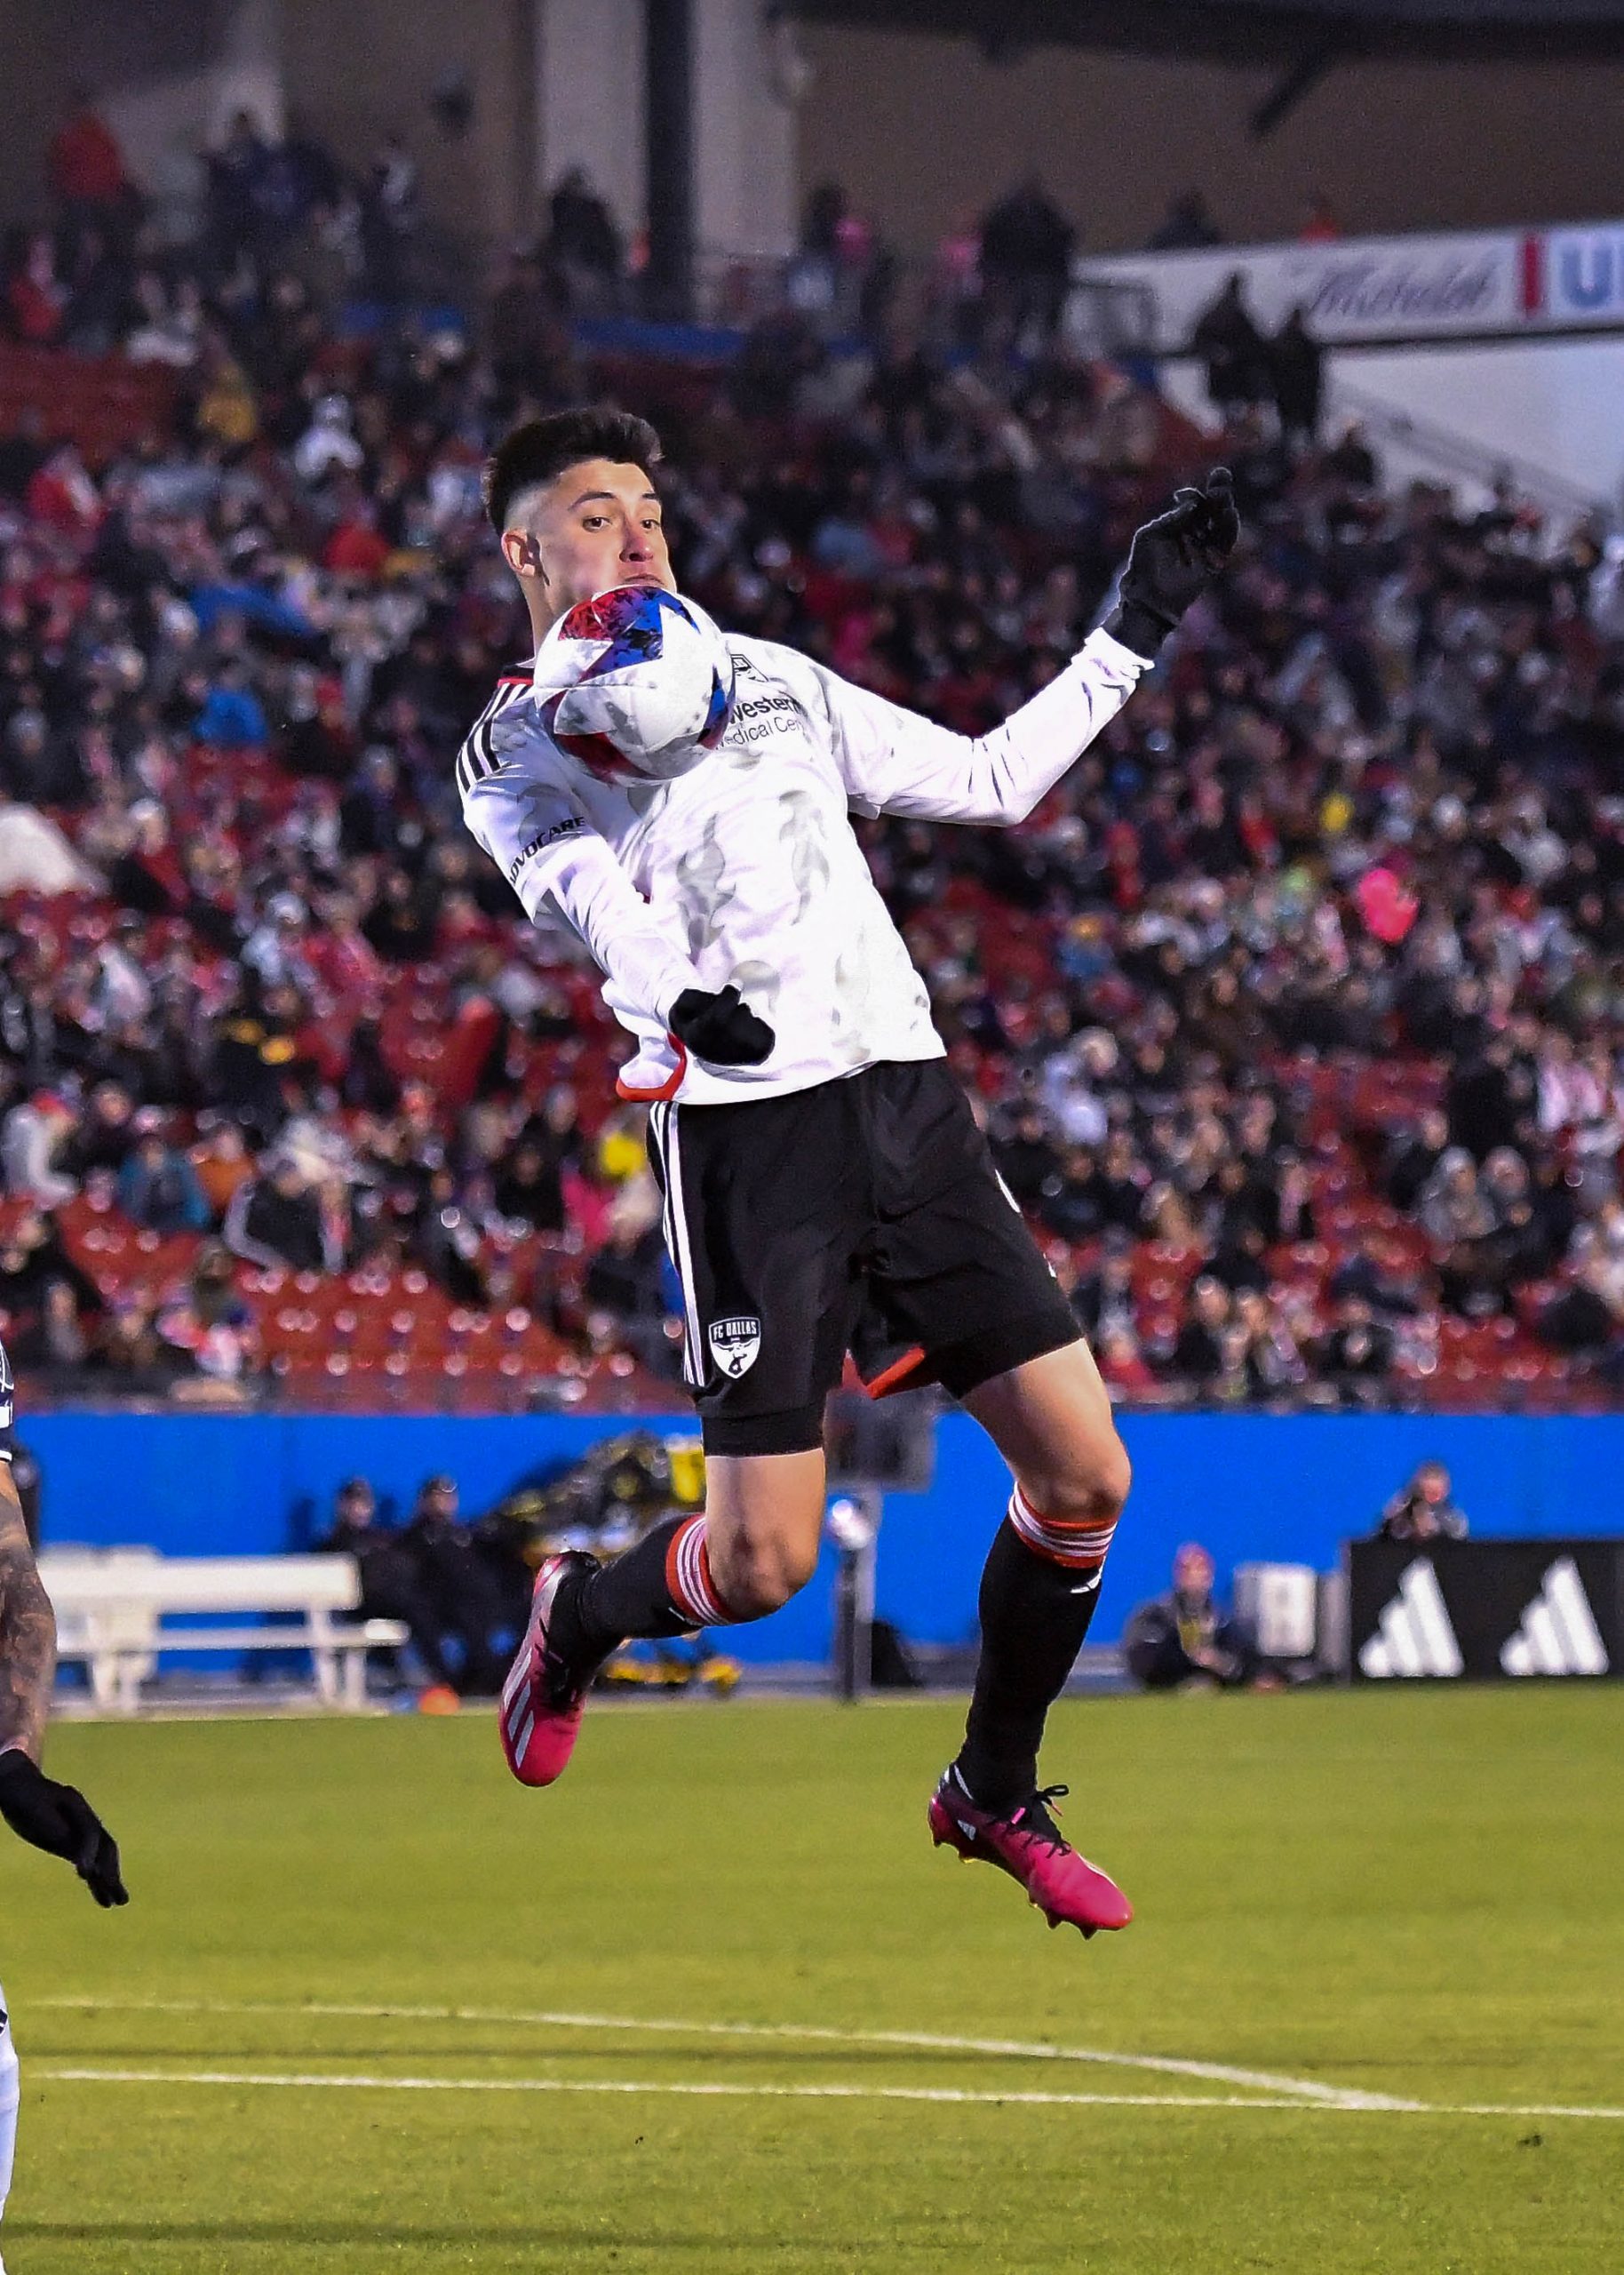 Marco Farfan leaps in the air to chest the ball in the MLS match against Sporting KC on Saturday, March 18, 2023, at Toyota Stadium. (Daniel McCullough, 3rd Degree)